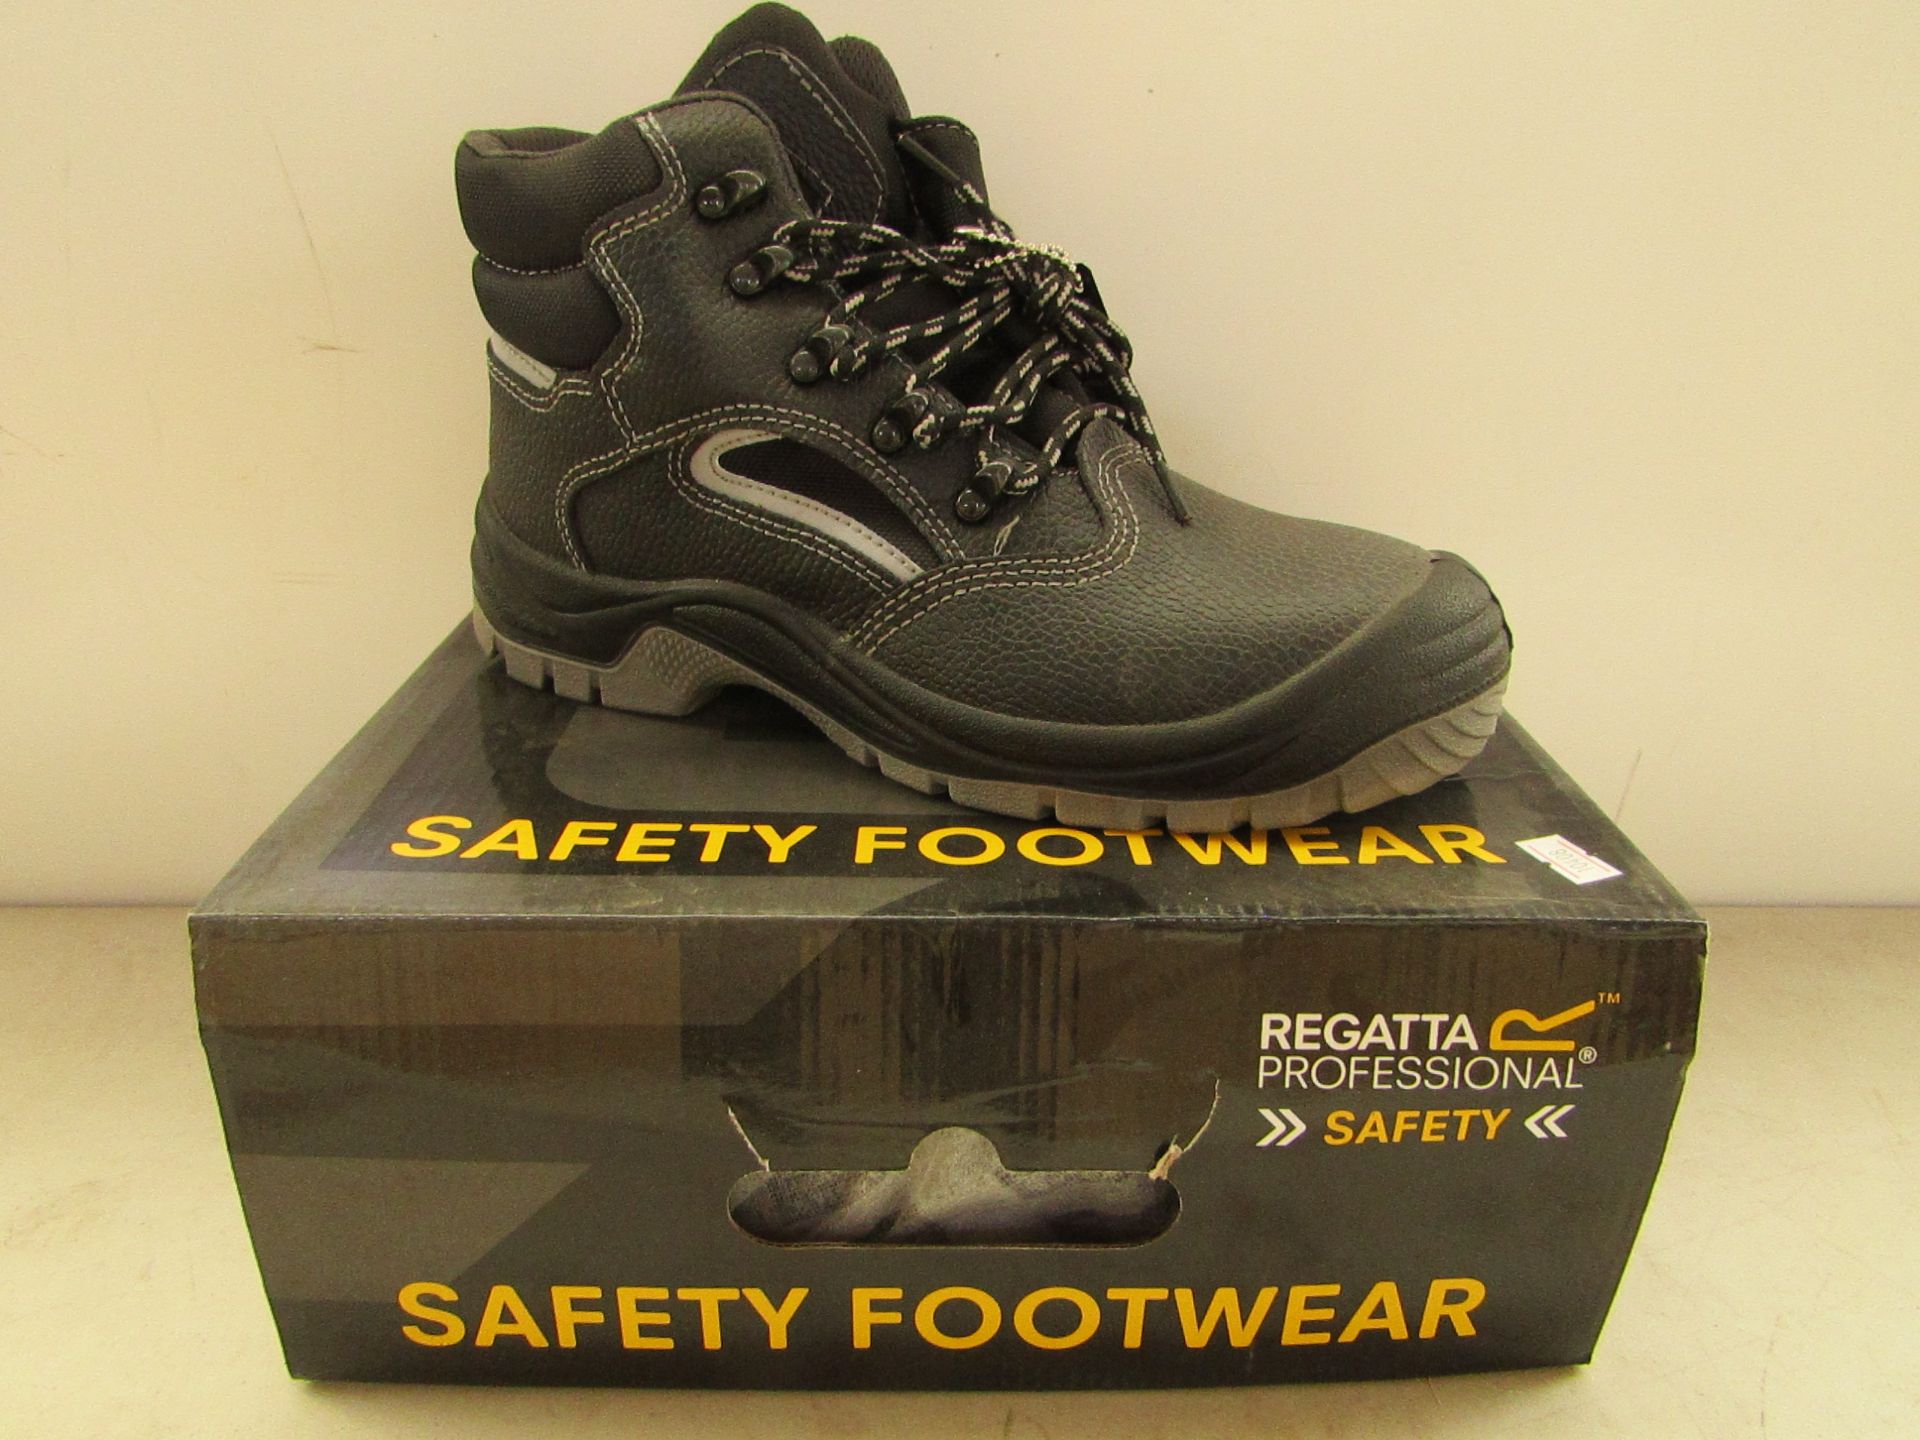 Regatta Professional Crompton steel toe cap safety boots, size UK7, RRP £59.99 new and boxed.